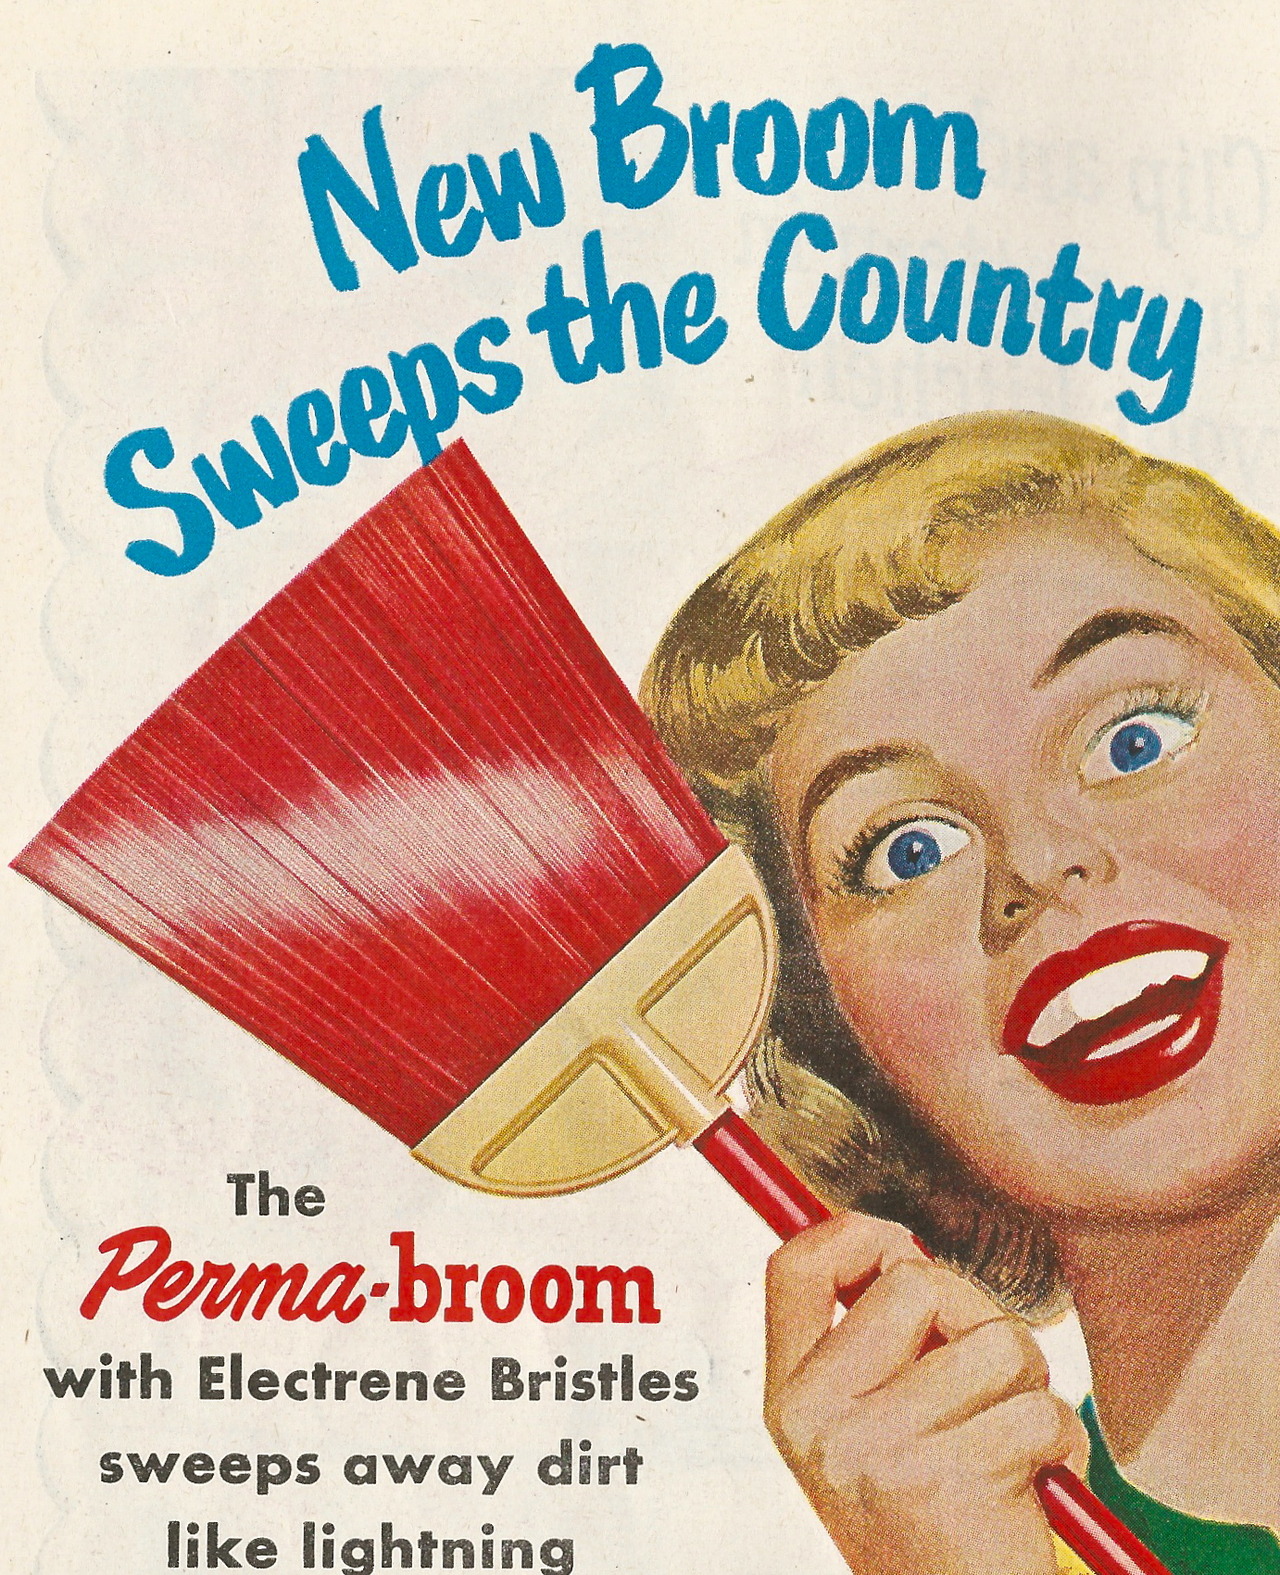 an advertit for tooth brushes featuring a woman blowing the brush